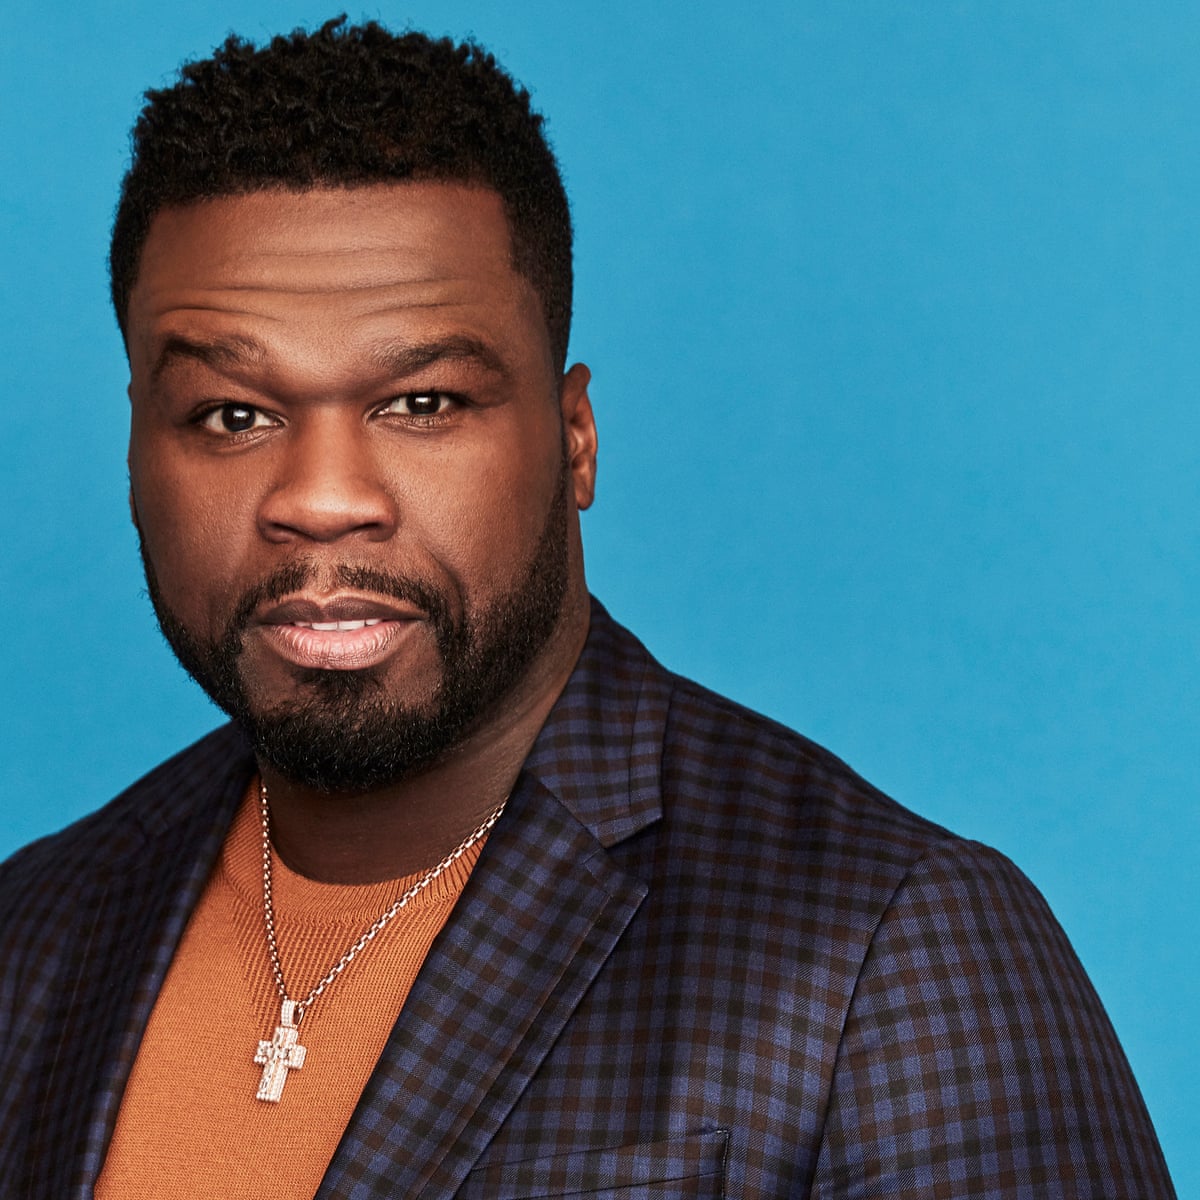 Power player: how 50 Cent went from rapper to unlikely TV kingpin | 50 Cent  | The Guardian